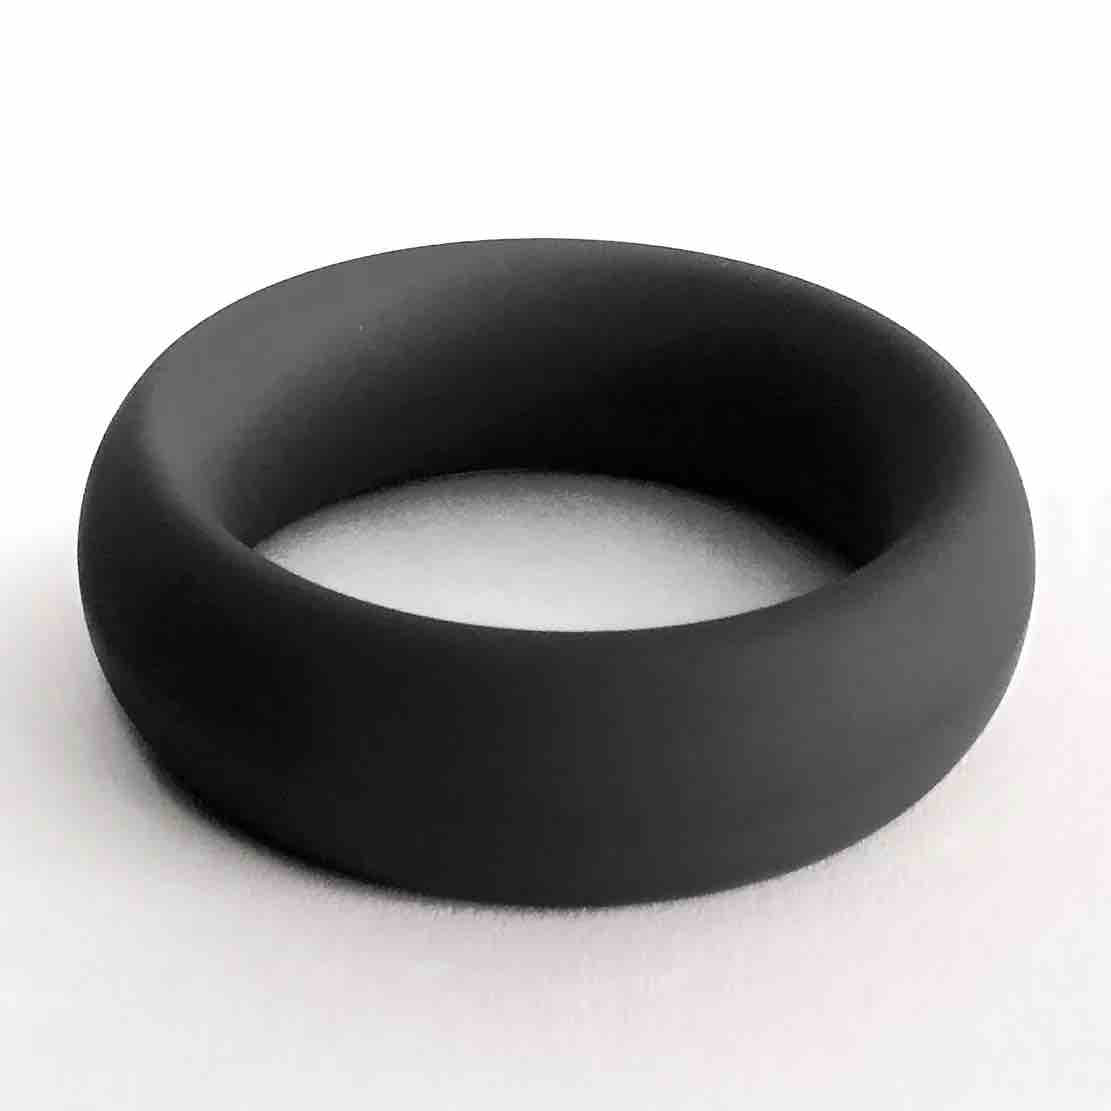 The black Meat Rack Cock Ring lying on its side to show girth.